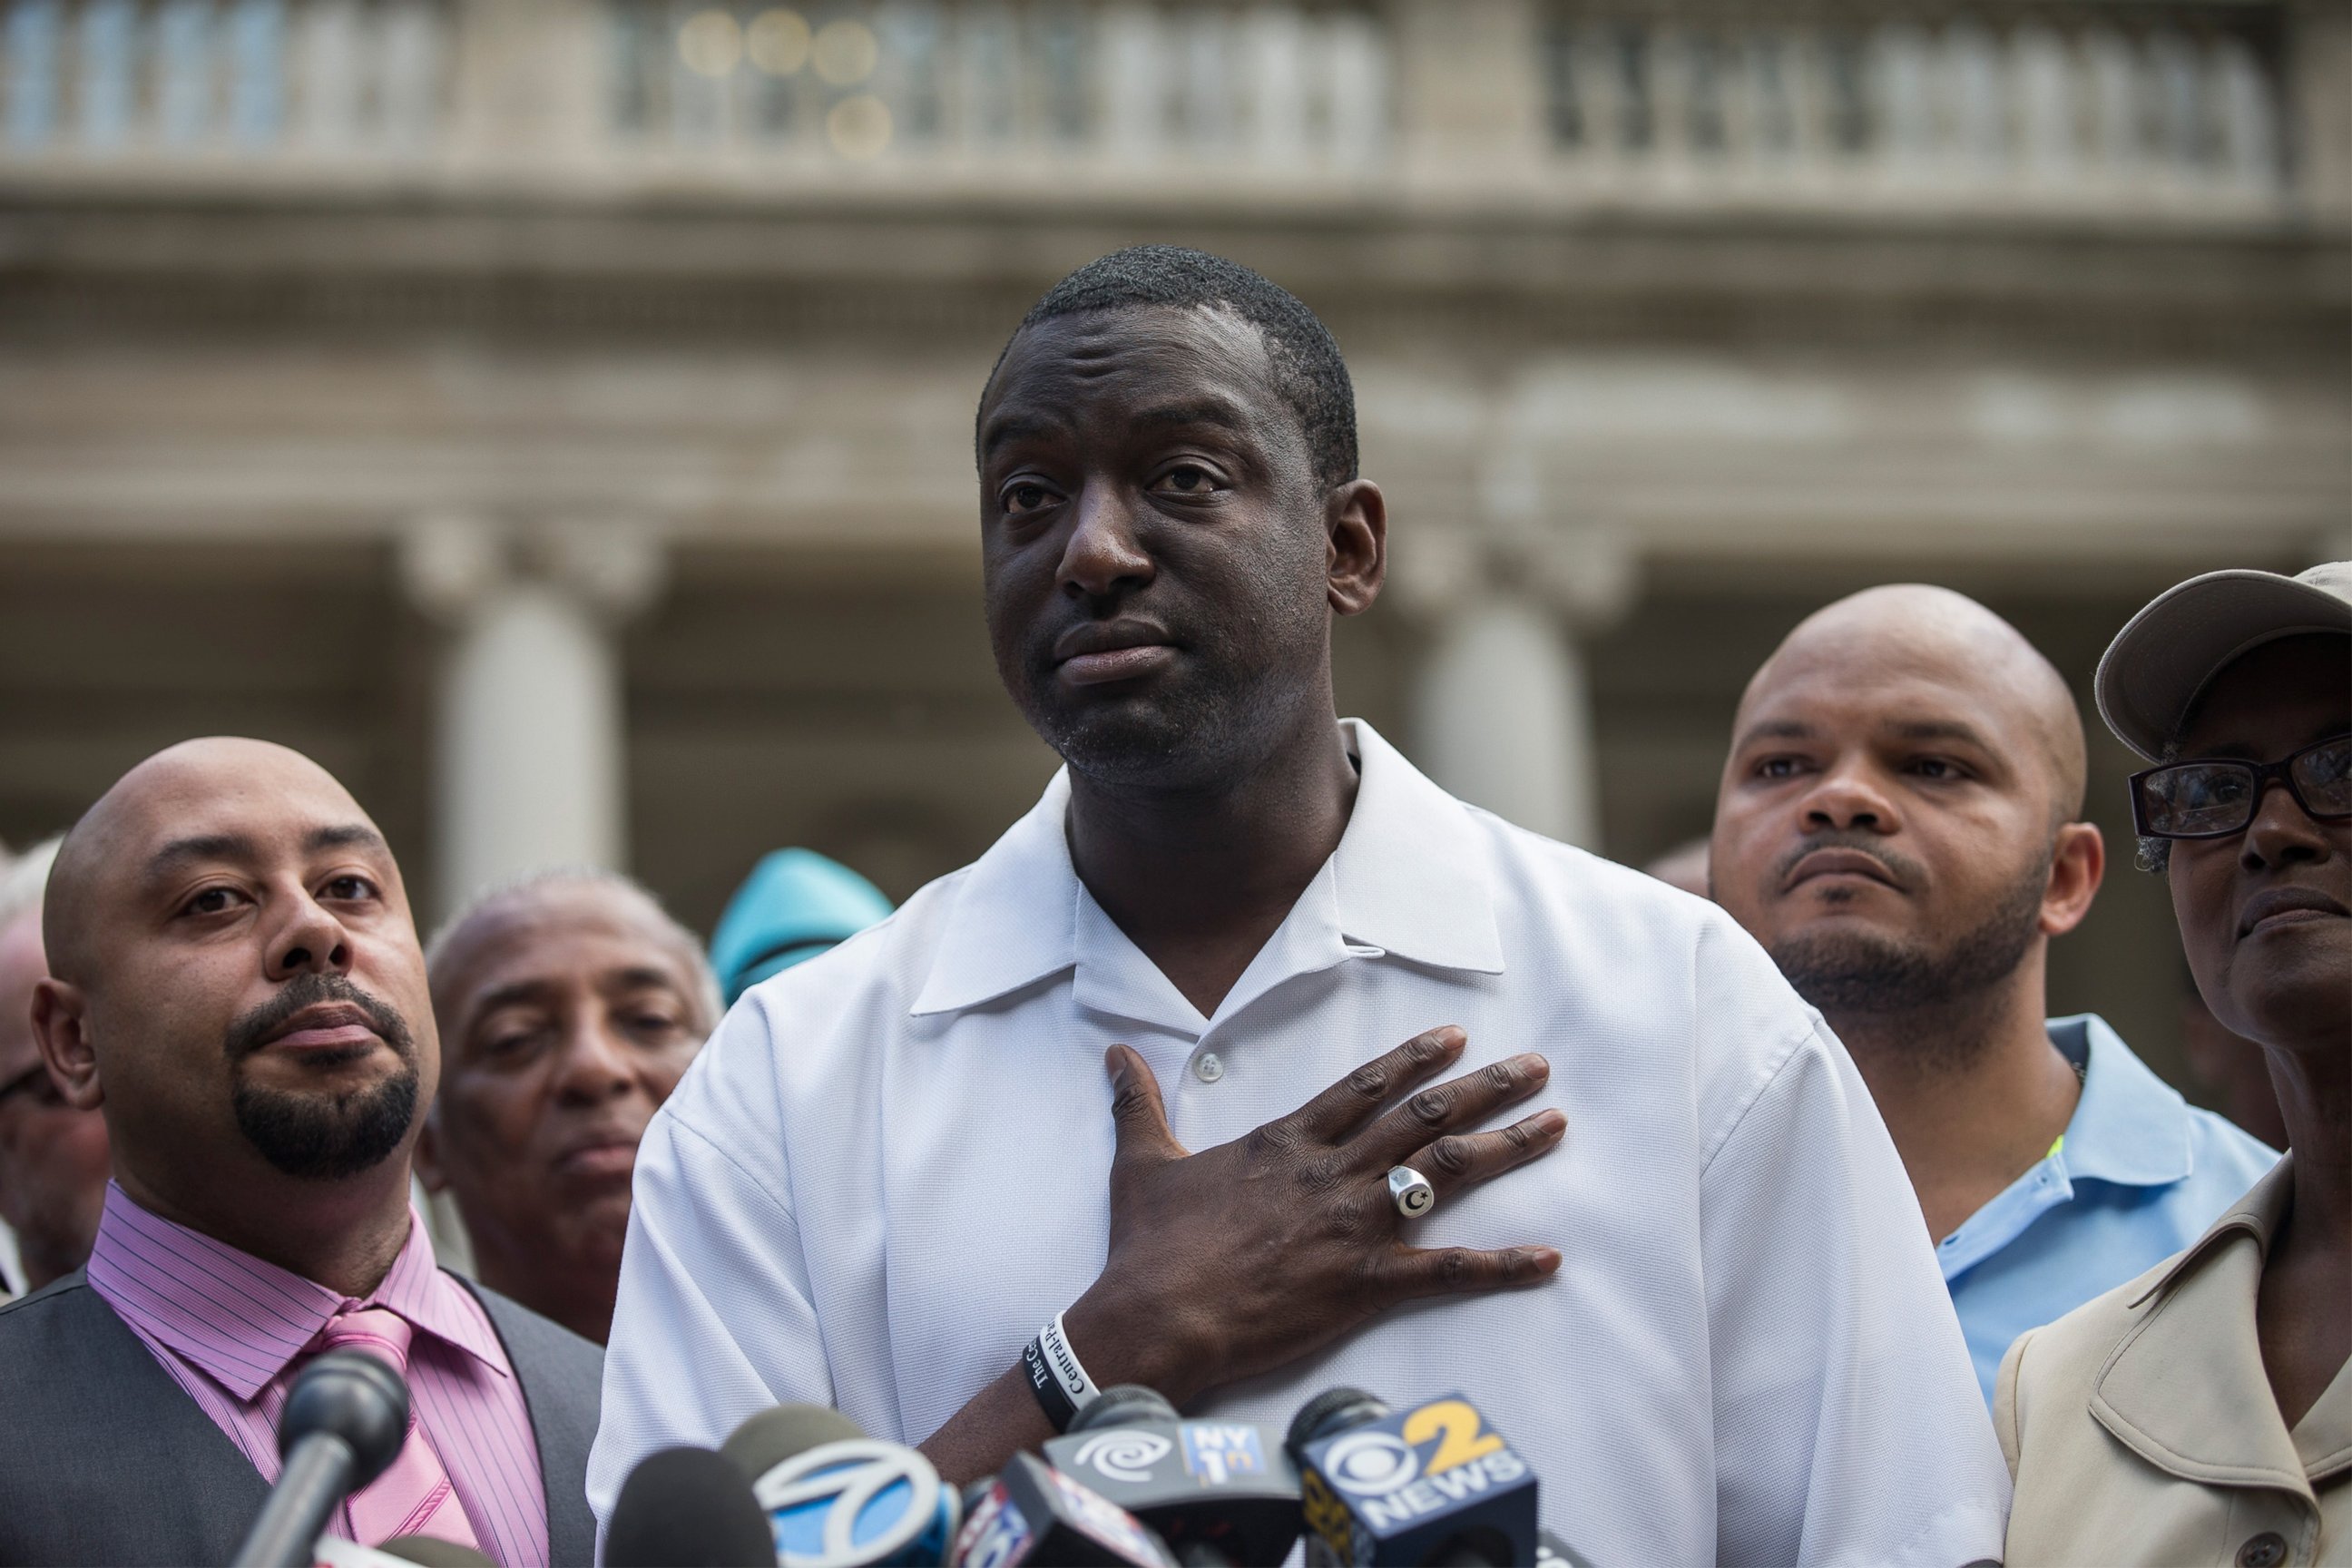 PHOTO: (L-R) Raymond Santana, Yusef Salaam and Kevin Richardson, three of the five men wrongfully convicted of raping a woman in Central Park in 1989, speak at a press conference on the steps of city halls on June 27, 2014 in New York City.